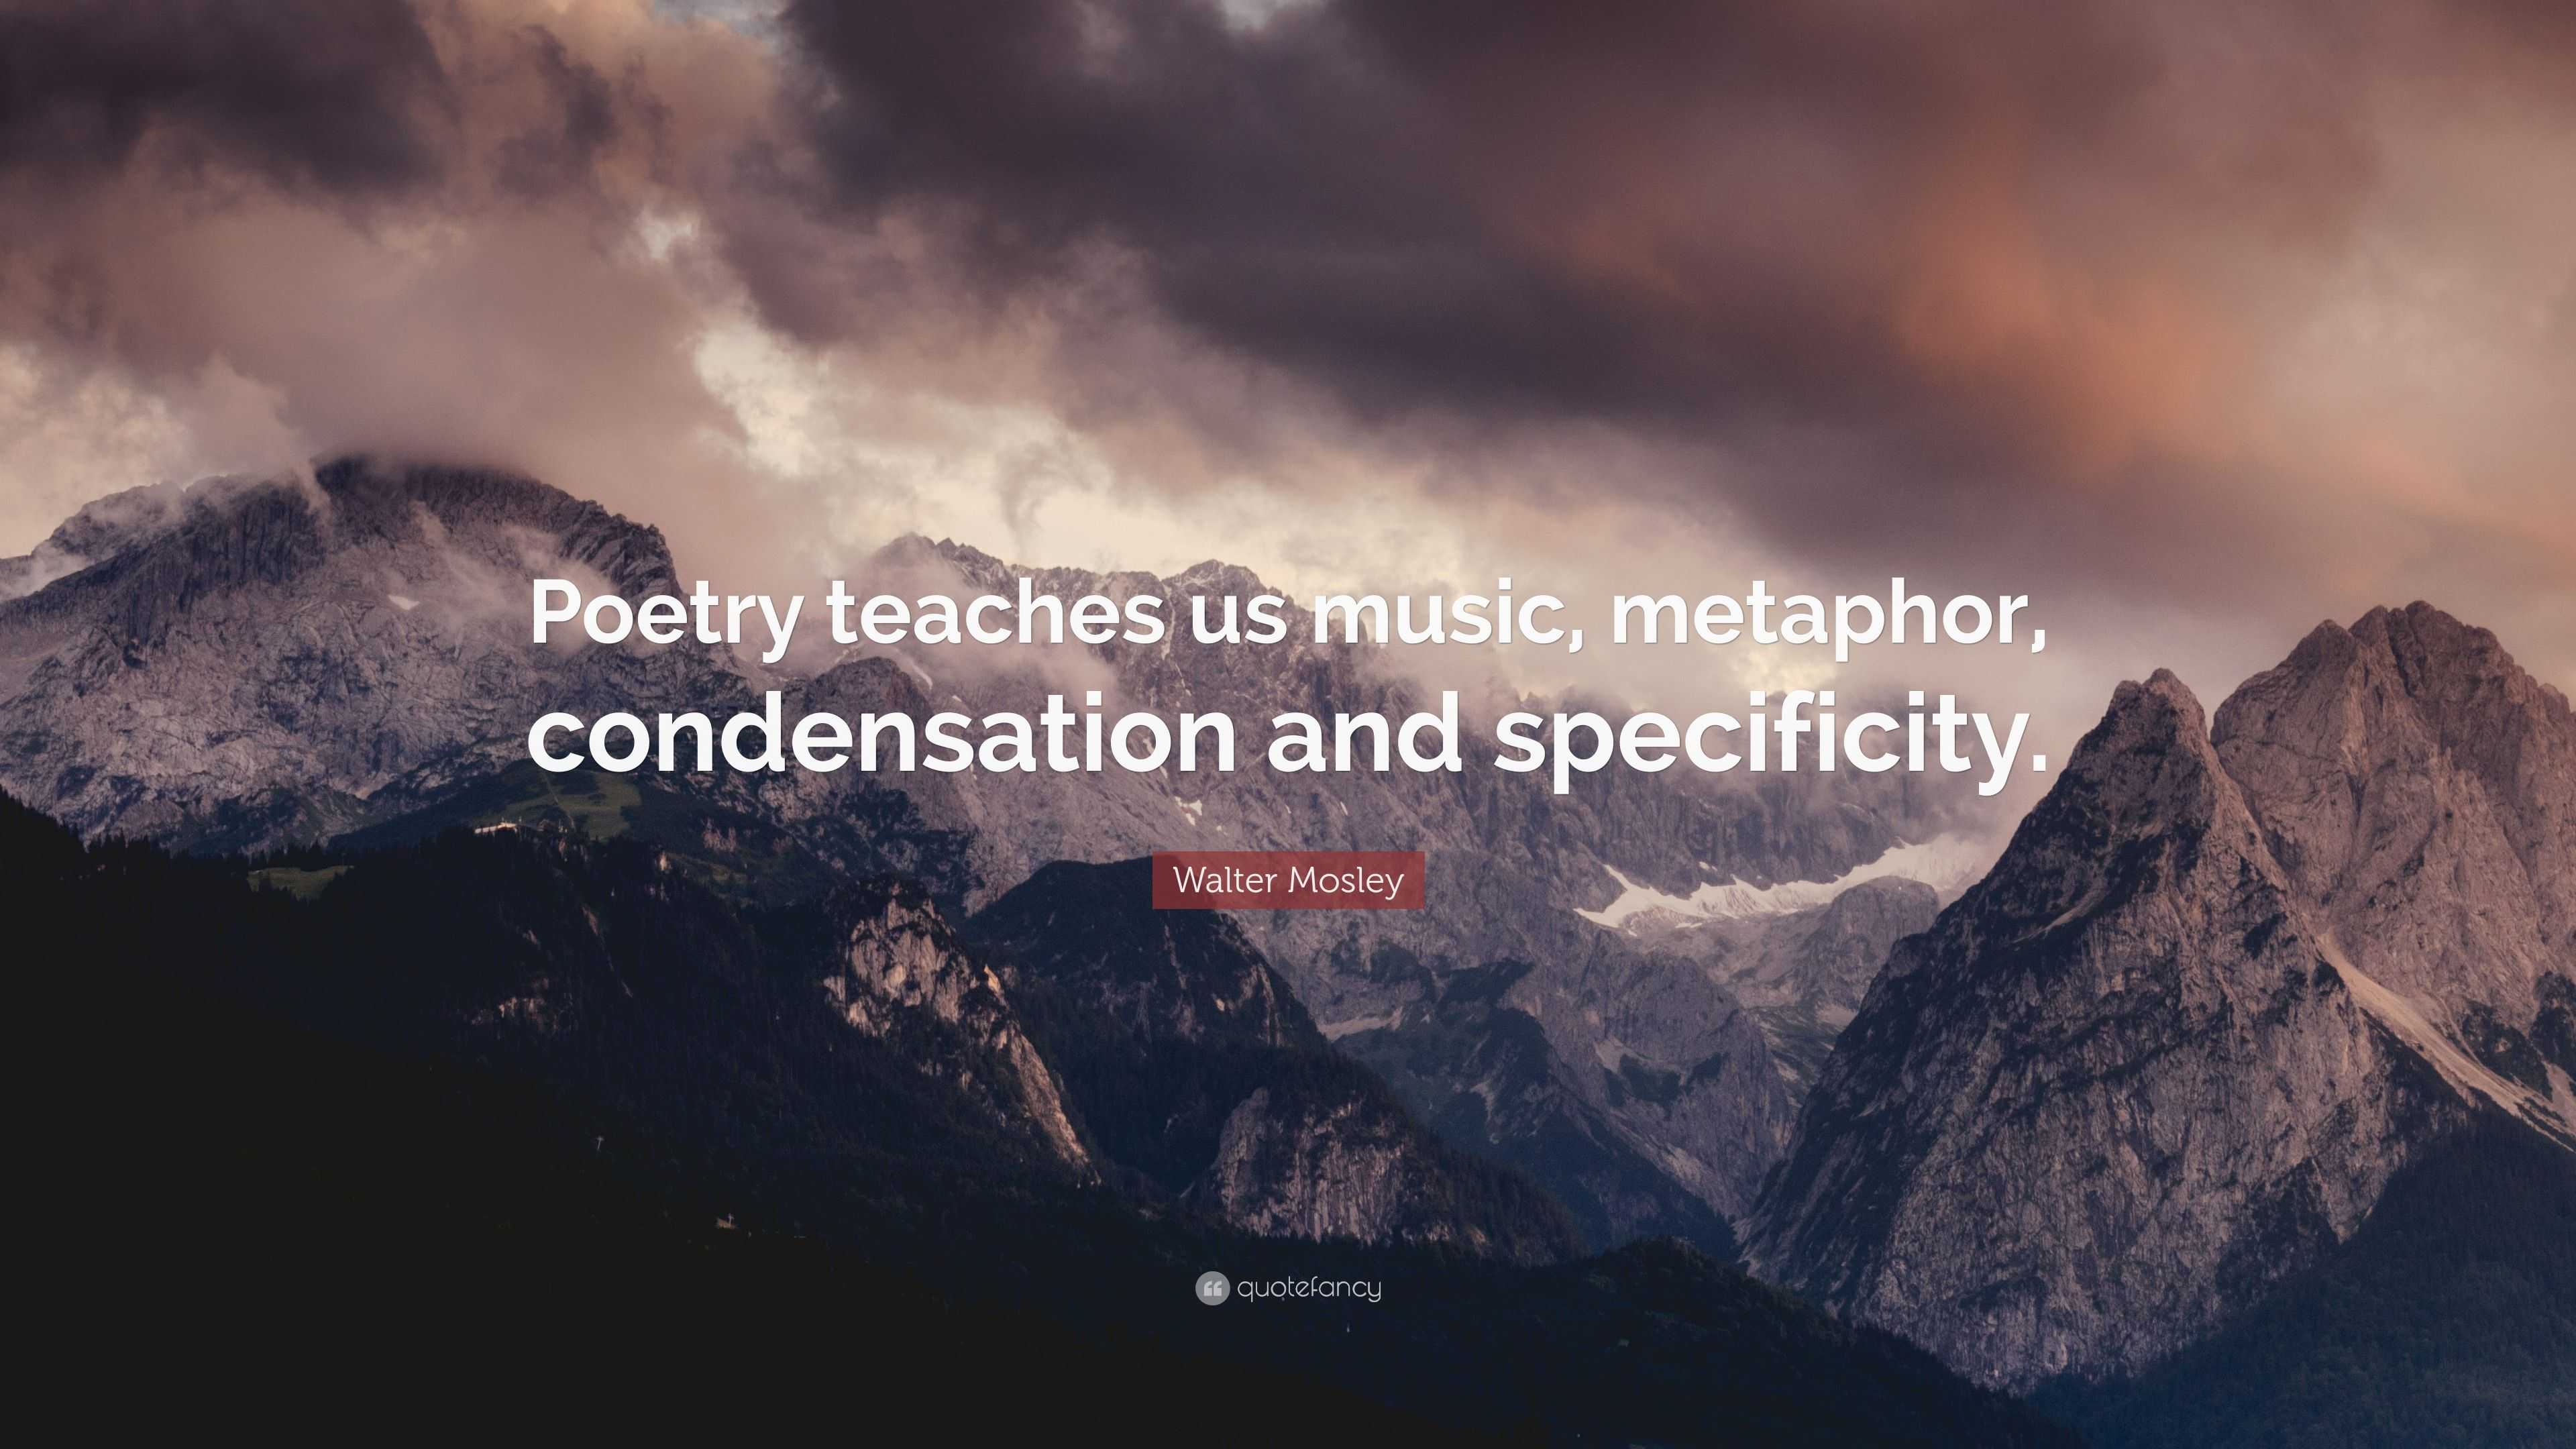 metaphor poems about music